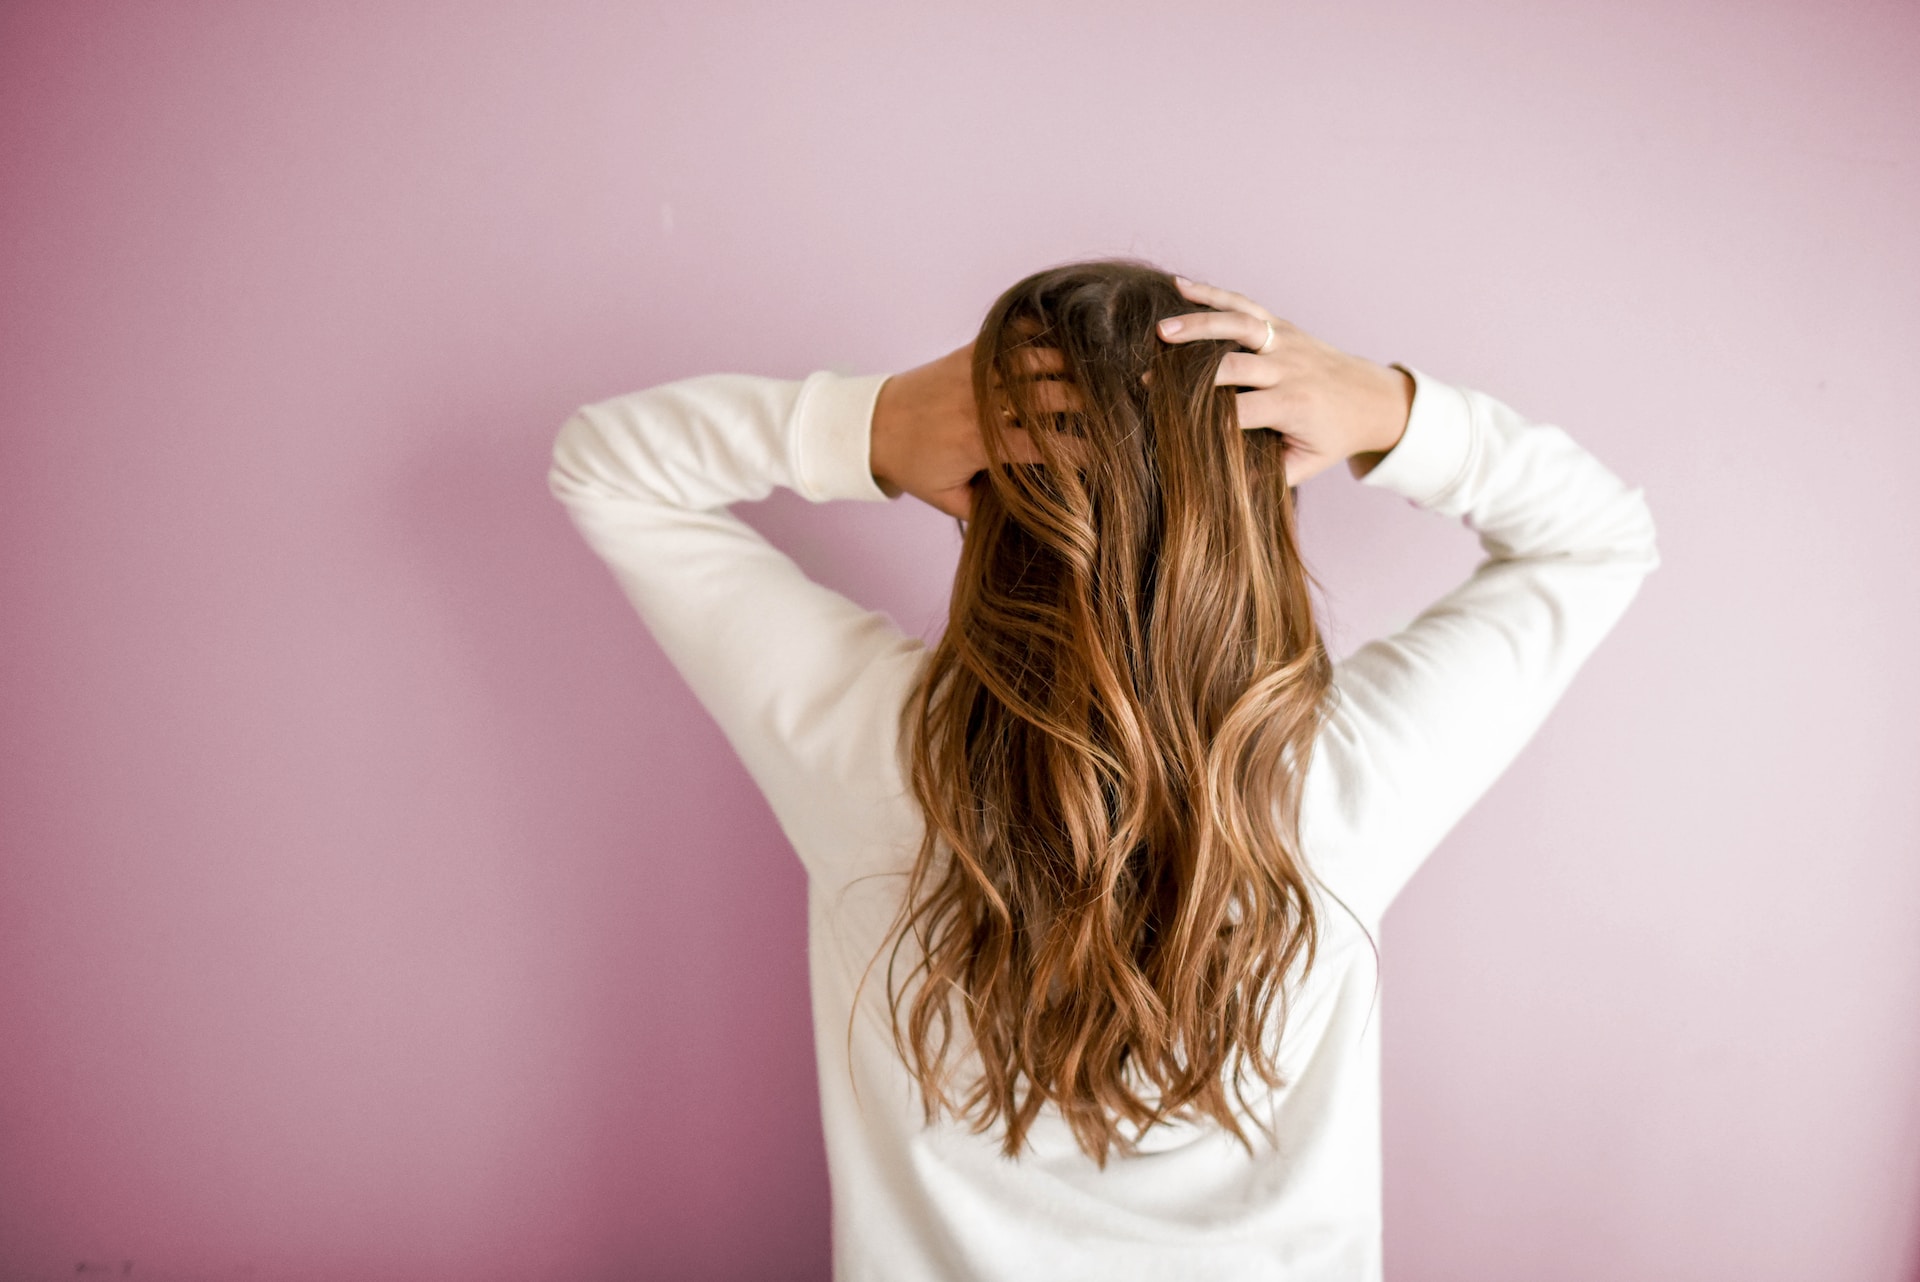 7 Tips to Help Make Your Daily Hairstyle More Manageable